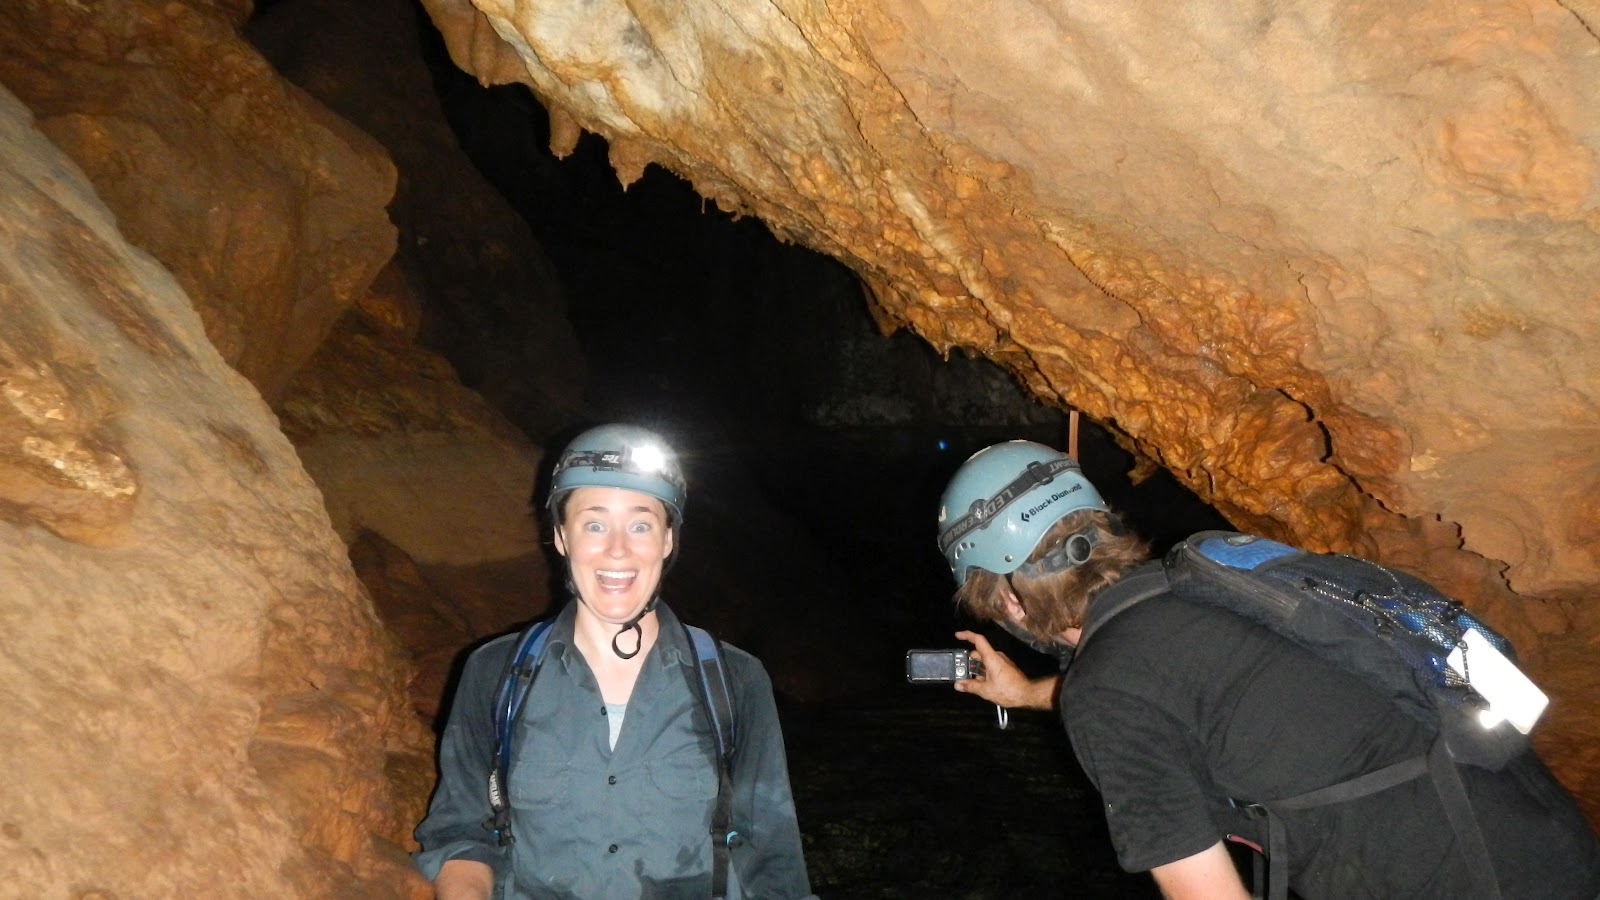 Round about Christmas Island: Daniel Roux Cave